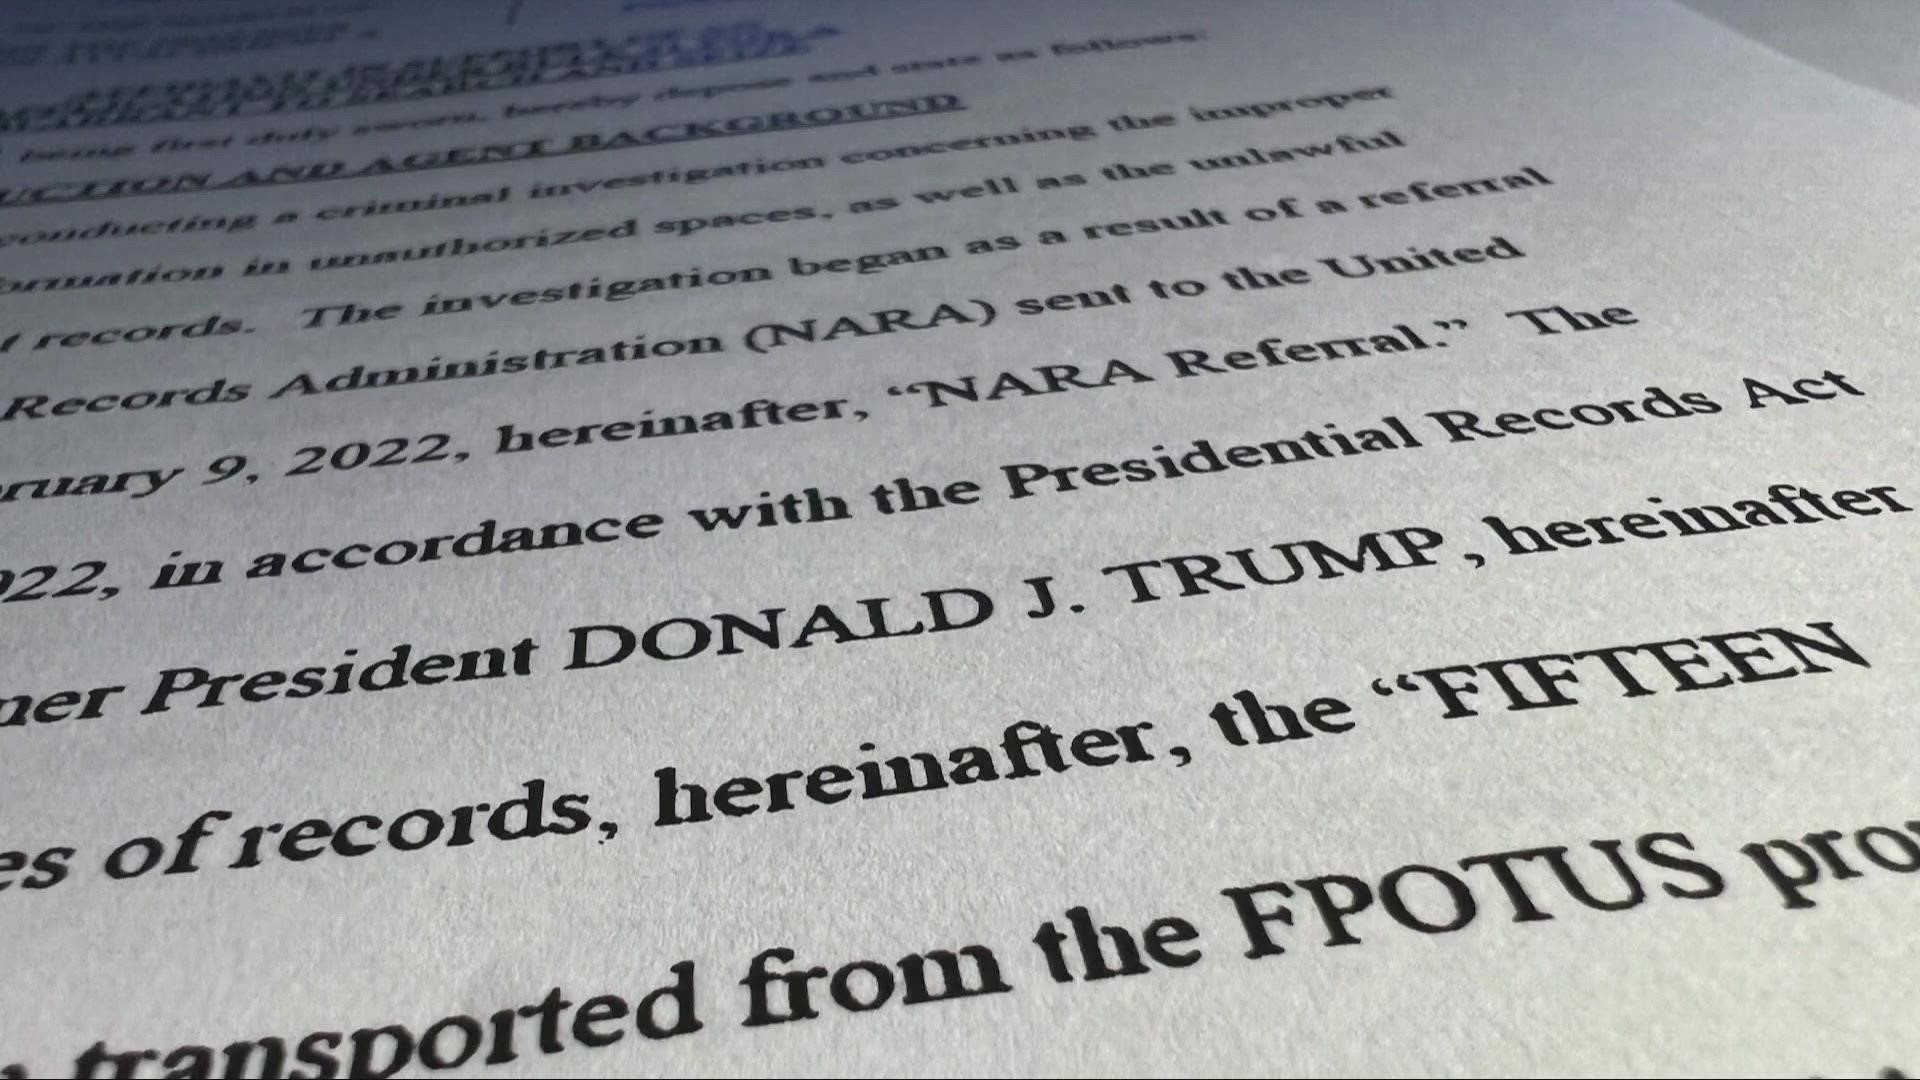 The Justice Department on Friday released a redacted version of an affidavit filed to get a search warrant for Trump's Mar-a-Lago estate.